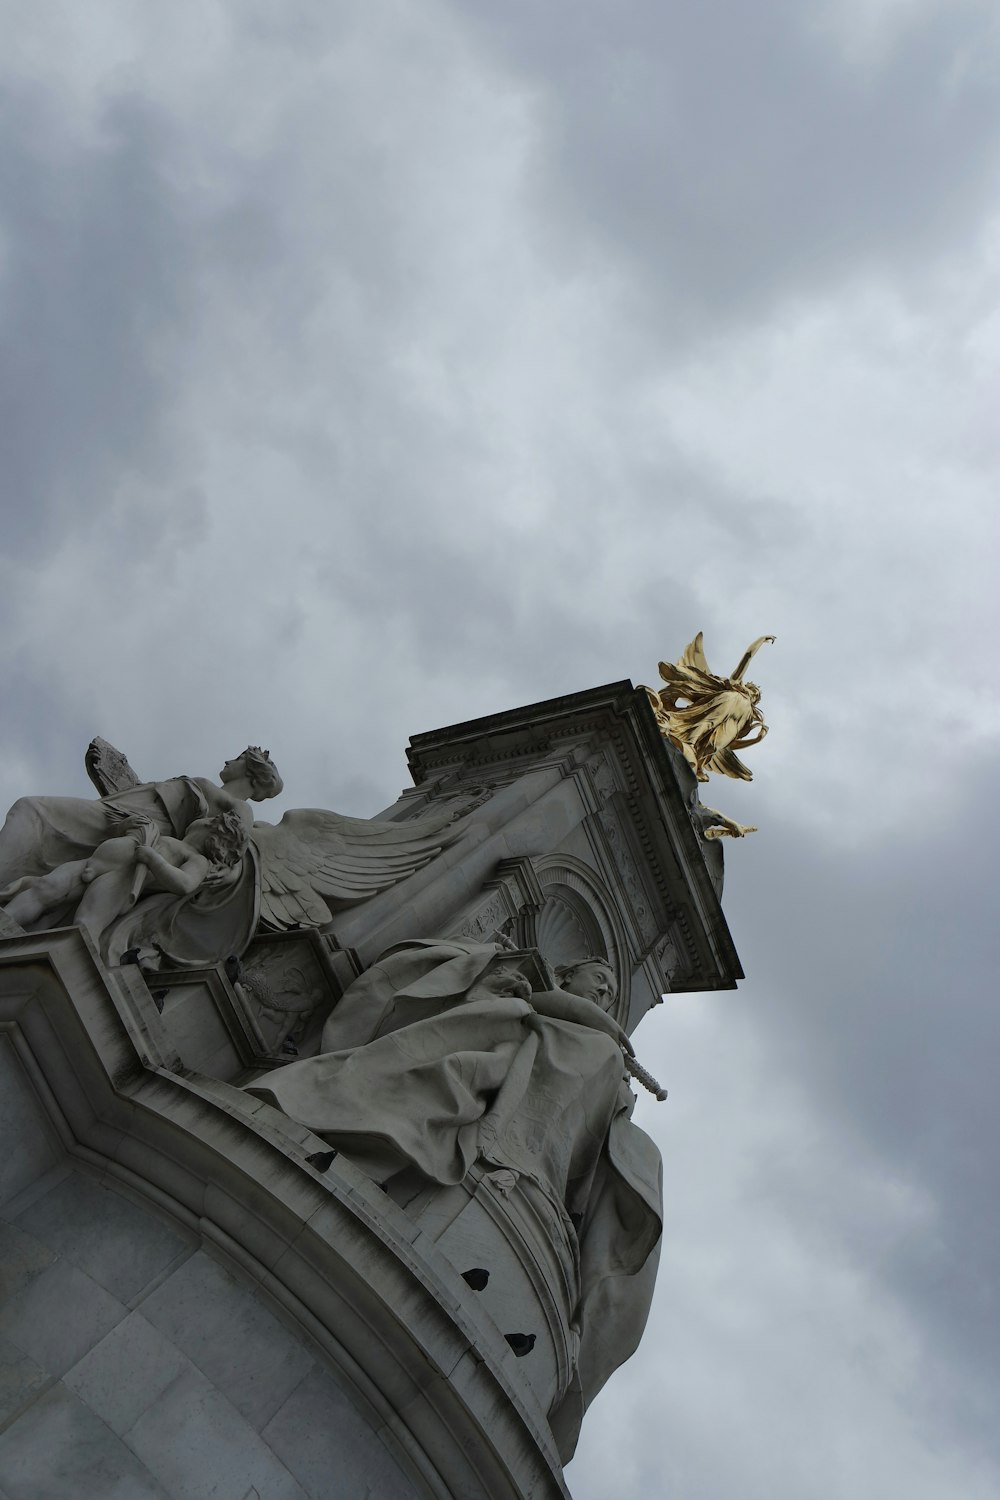 statue under cloudy sky during daytime